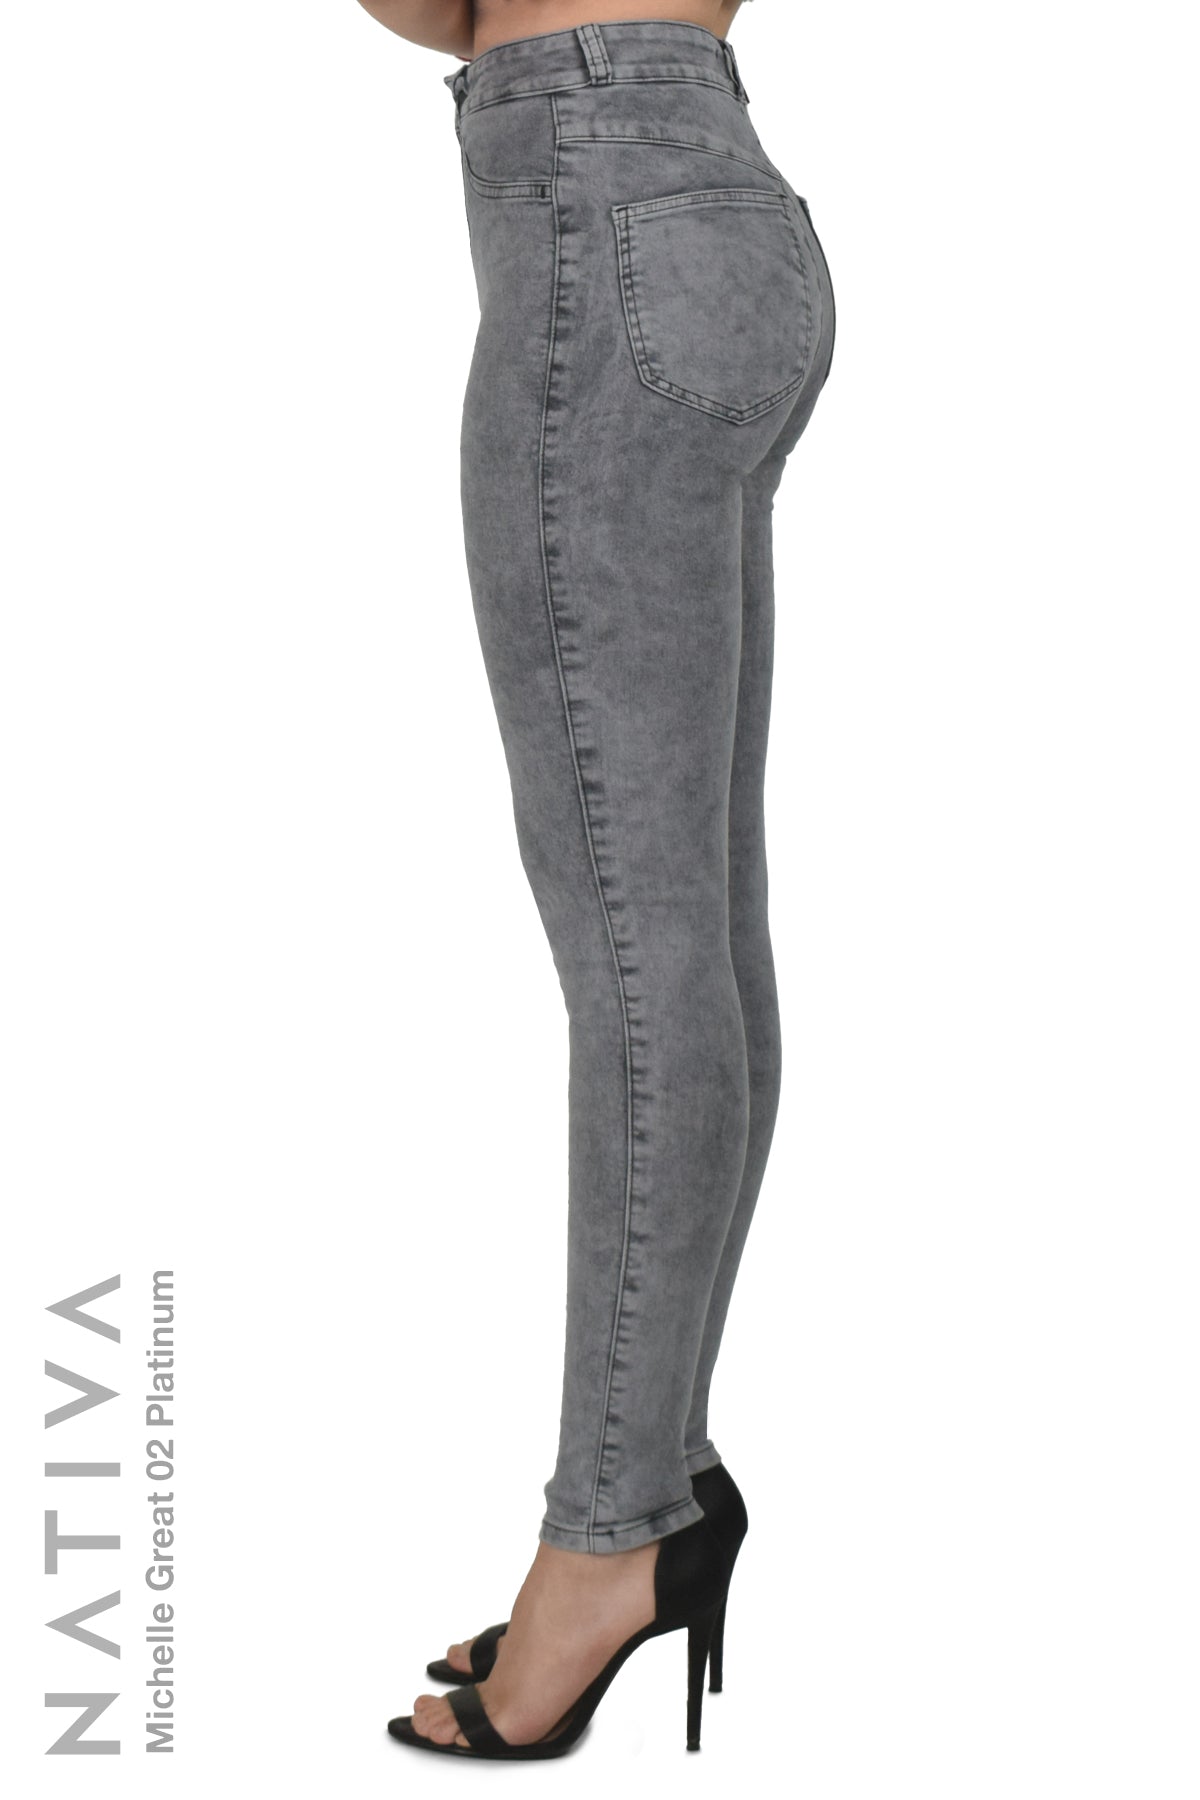 STRETCH High Shaping JEANS. PLATINUM, Capaci MICHELLE 02 GREAT NATIVA,